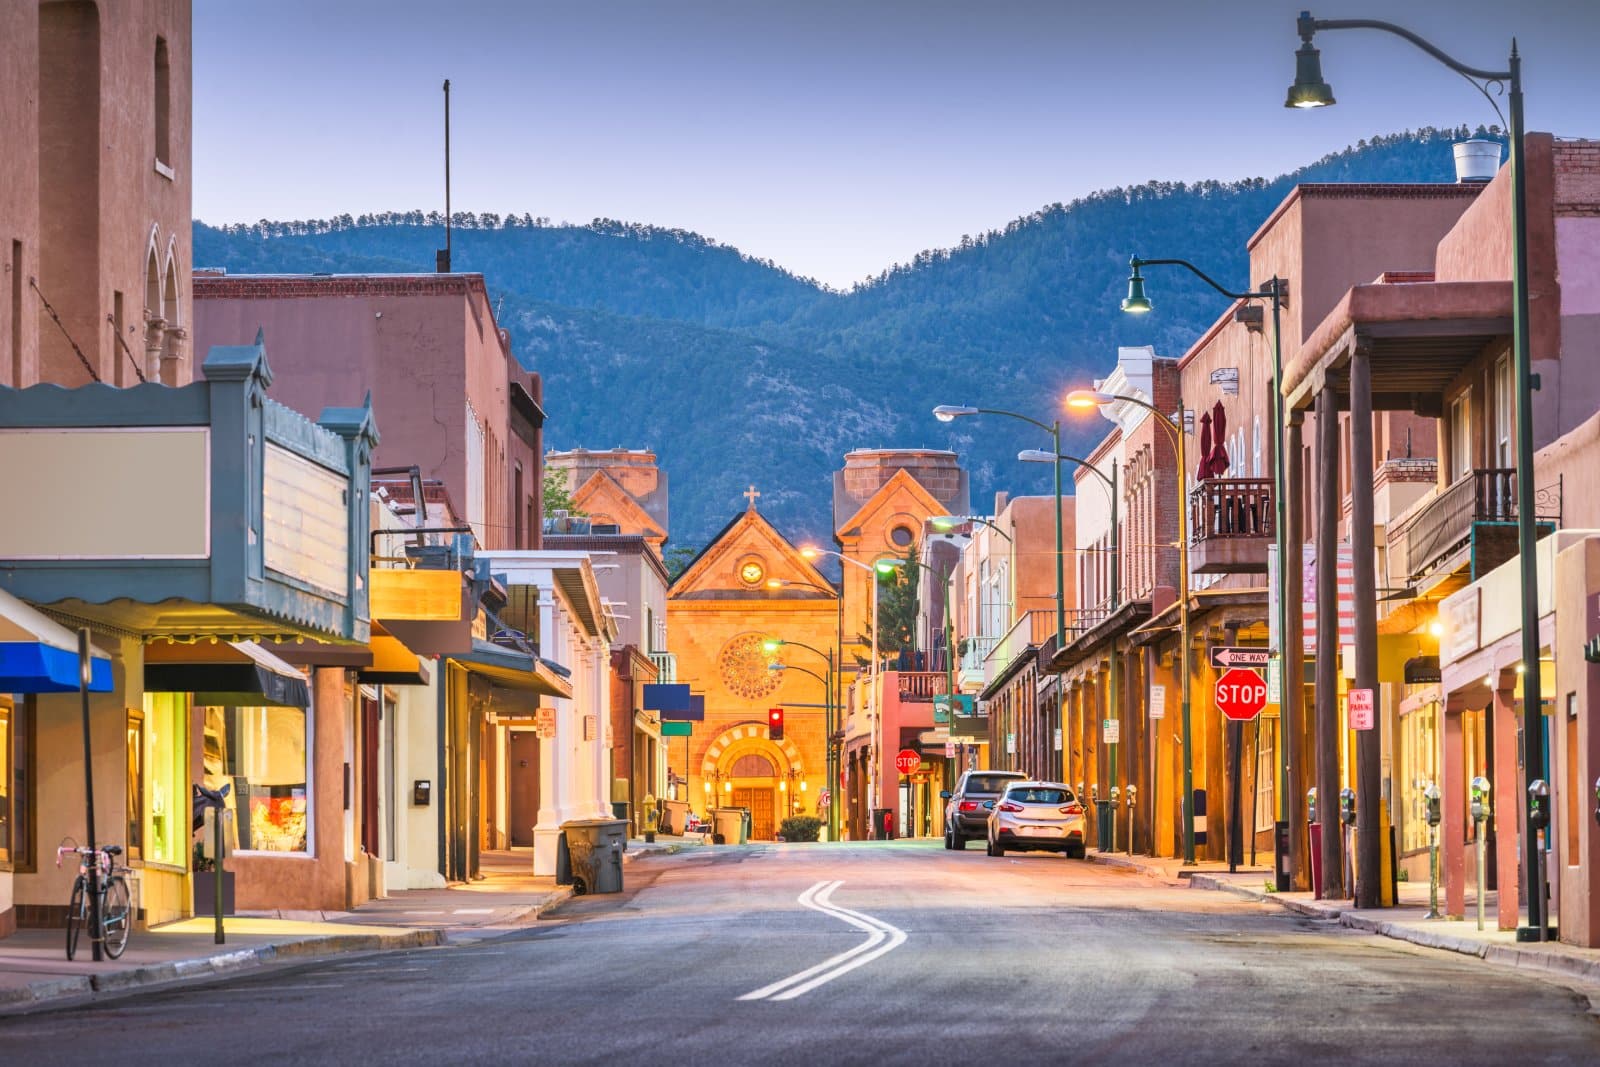 <p class="wp-caption-text">Image Credit: Shutterstock / Sean Pavone</p>  <p><span>Santa Fe enchants with its unique architecture, thriving arts scene, and stunning landscapes. It’s a cultural oasis in the desert, offering an unforgettable blend of history and creativity.</span></p>